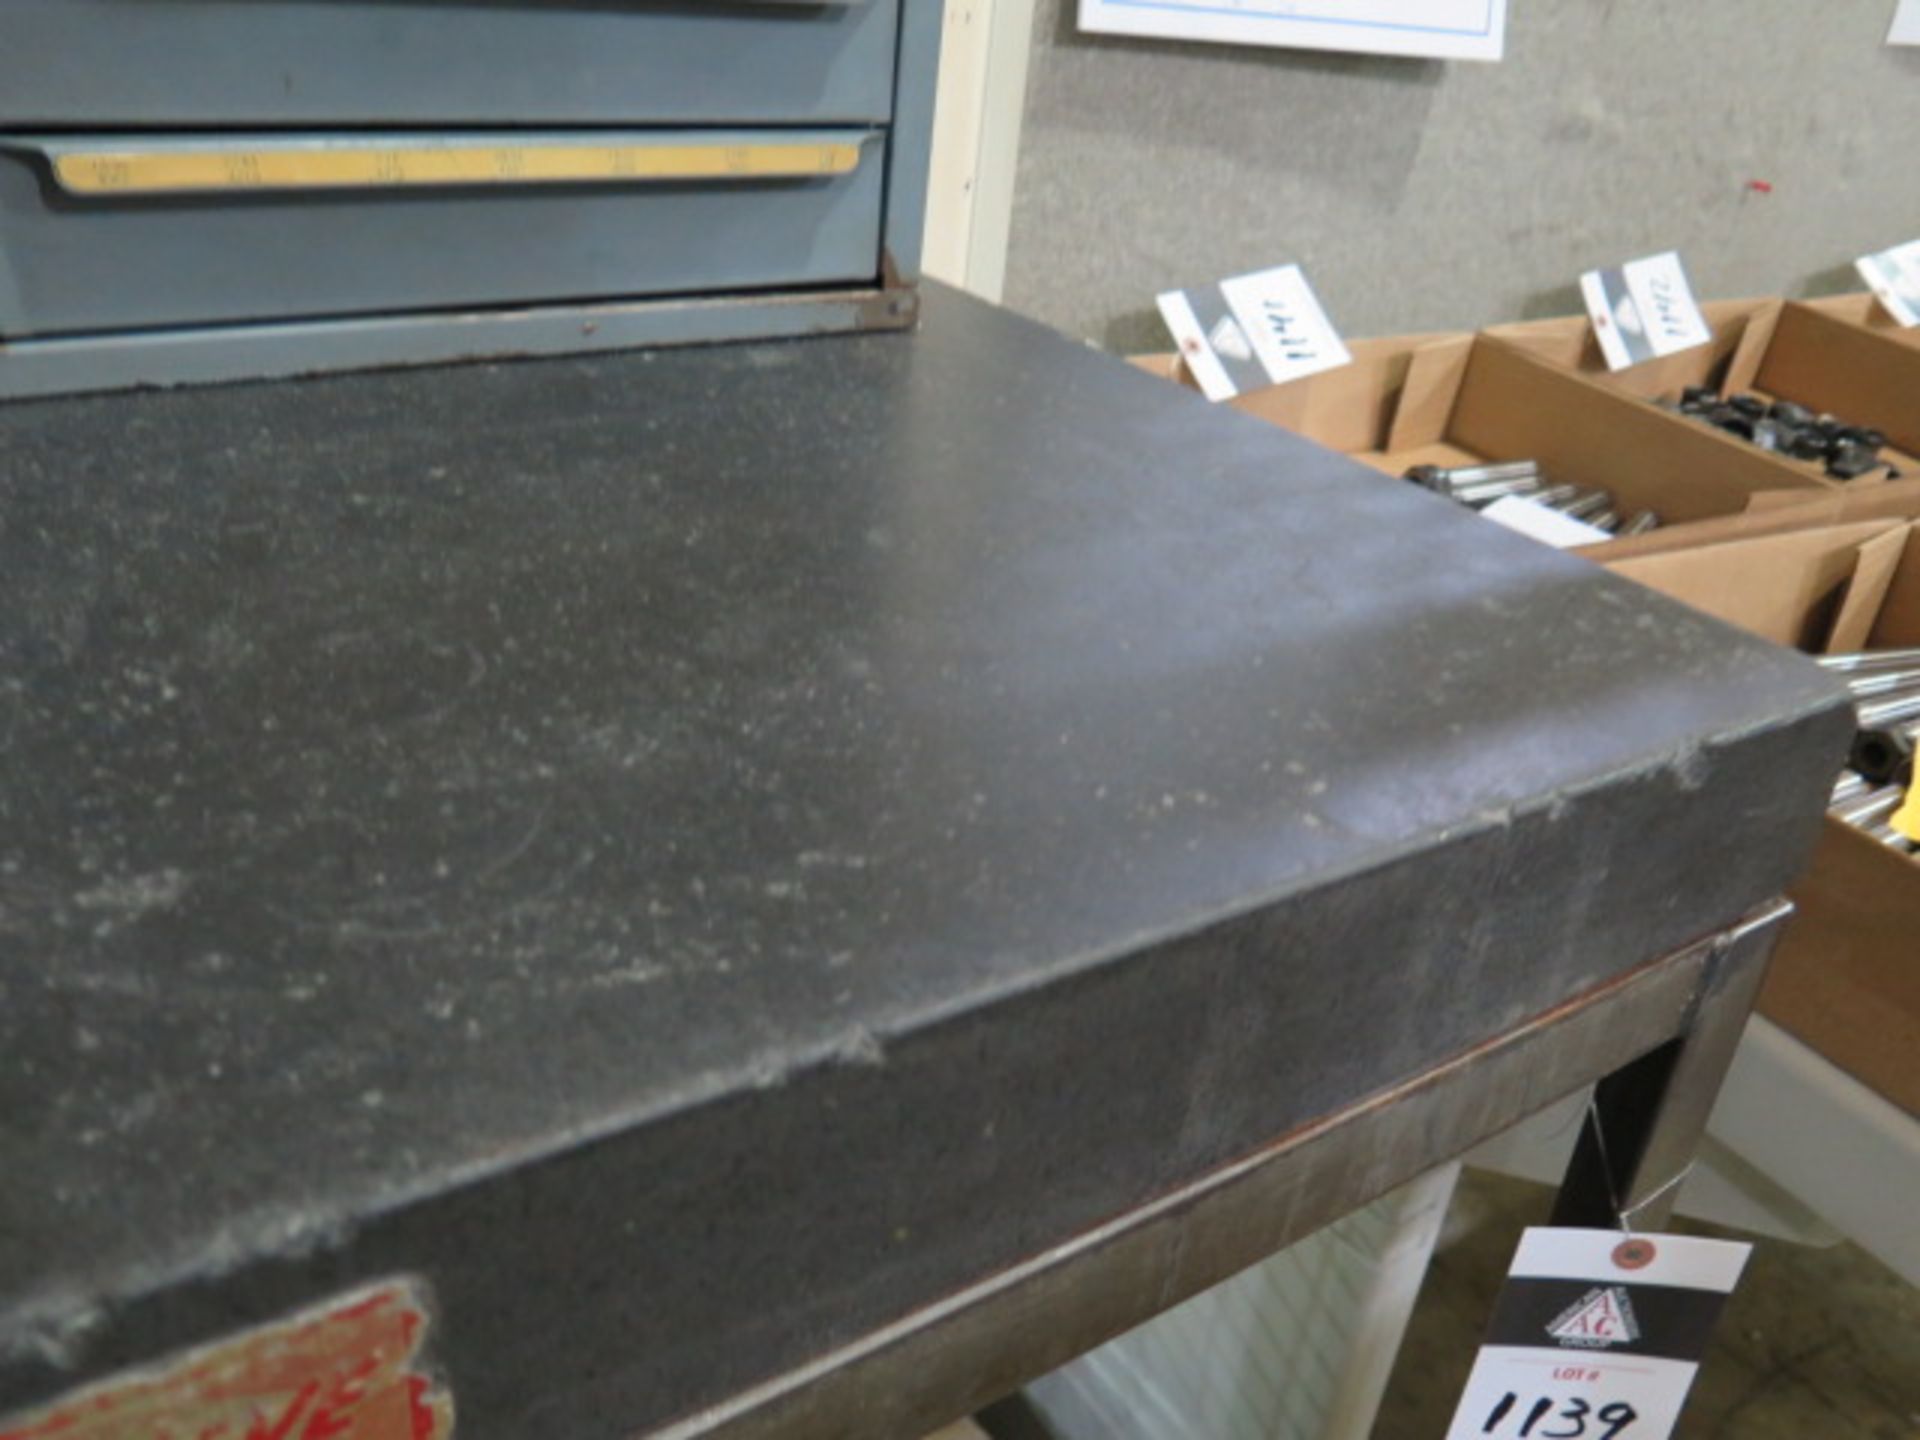 Mojave 24" x 36" x 3" Granite Surface Plate w/ Rolling Stand (SOLD AS-IS - NO WARRANTY) - Image 2 of 4